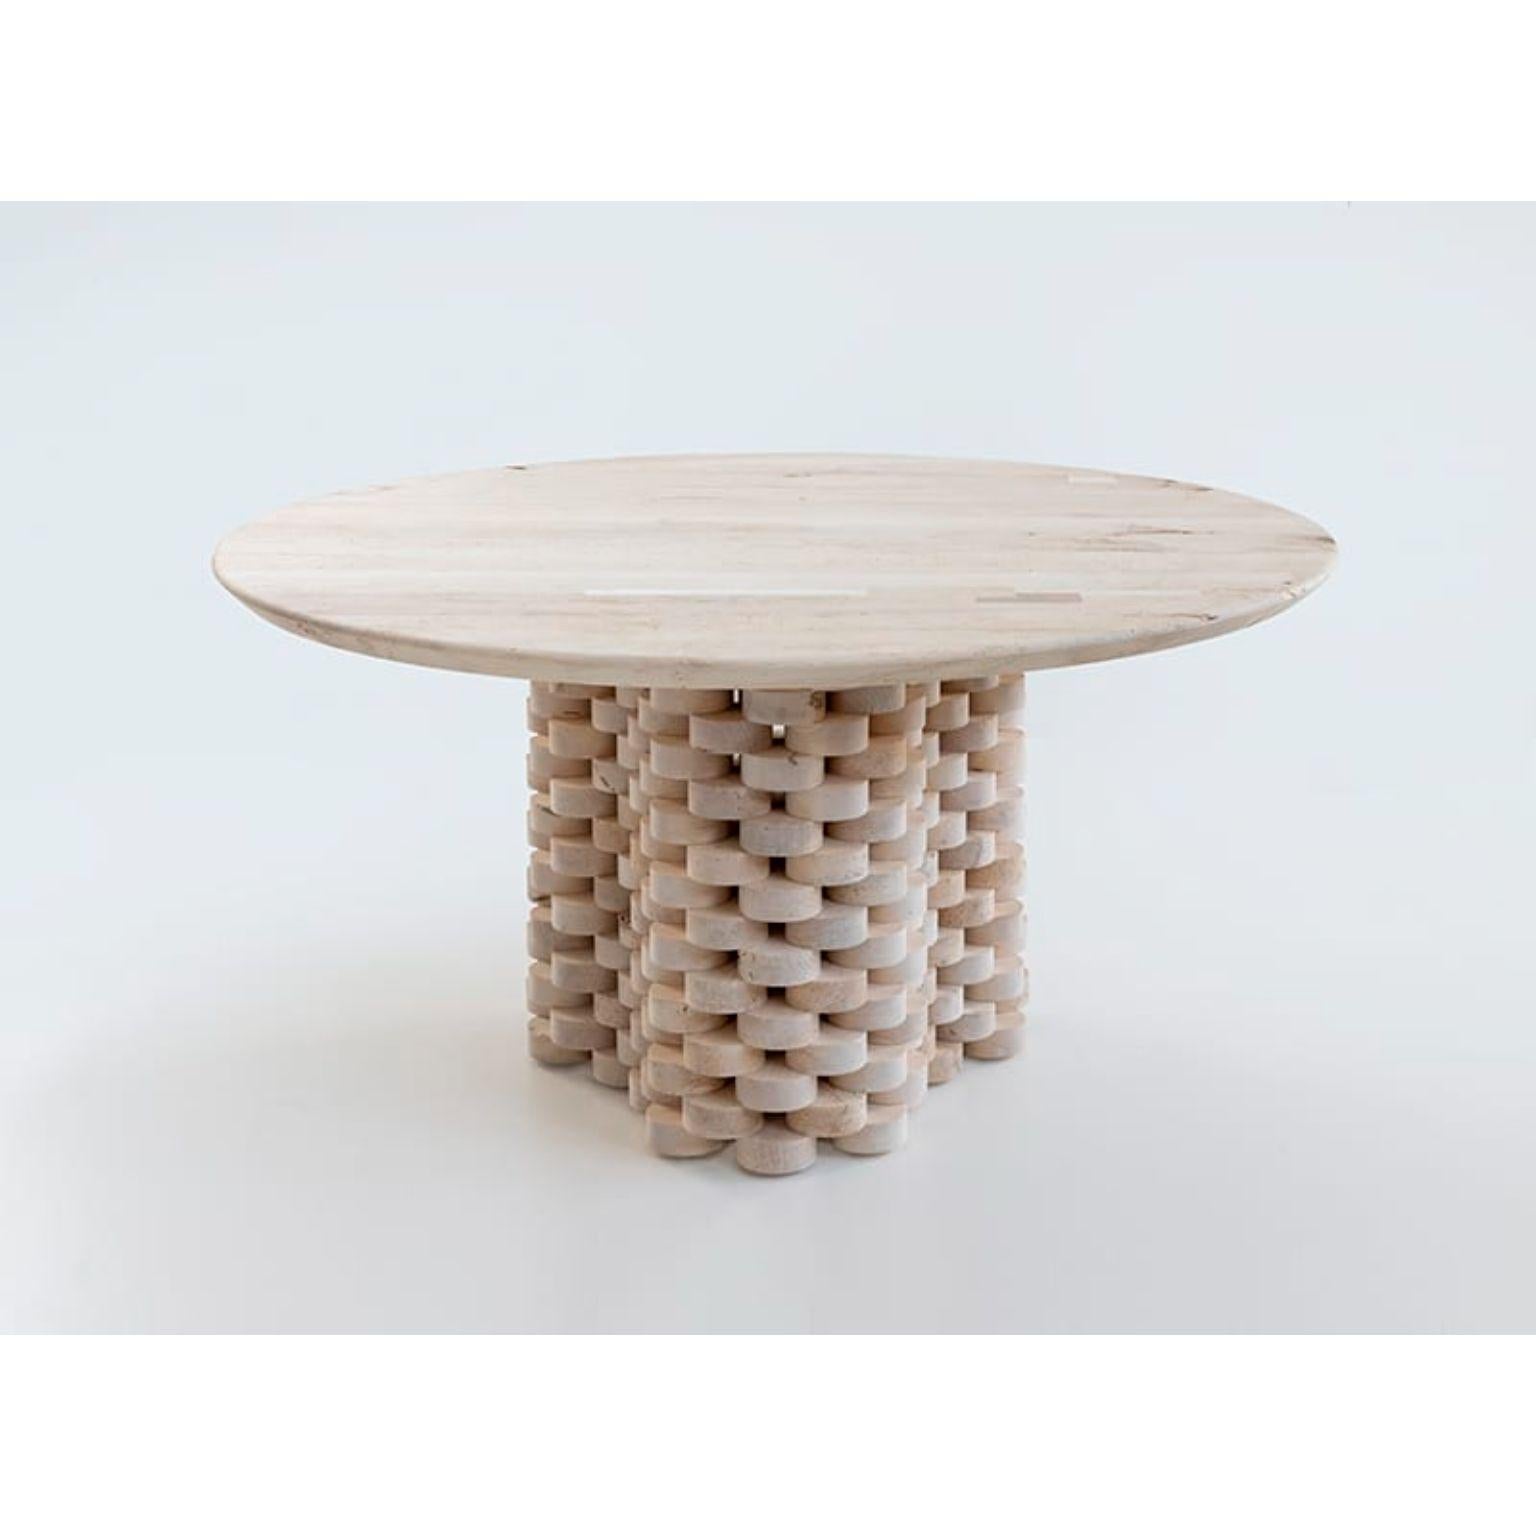 Nexum Table by Secondome Edizioni and Studio F
Designer: Naessi Studio.
Dimensions: Ø 140 x H 72 cm.
Materials: Solid woodworm maple wood.

Collection / Production: Secondome + Studio F. This piece can be customized. Available finishes: any solid